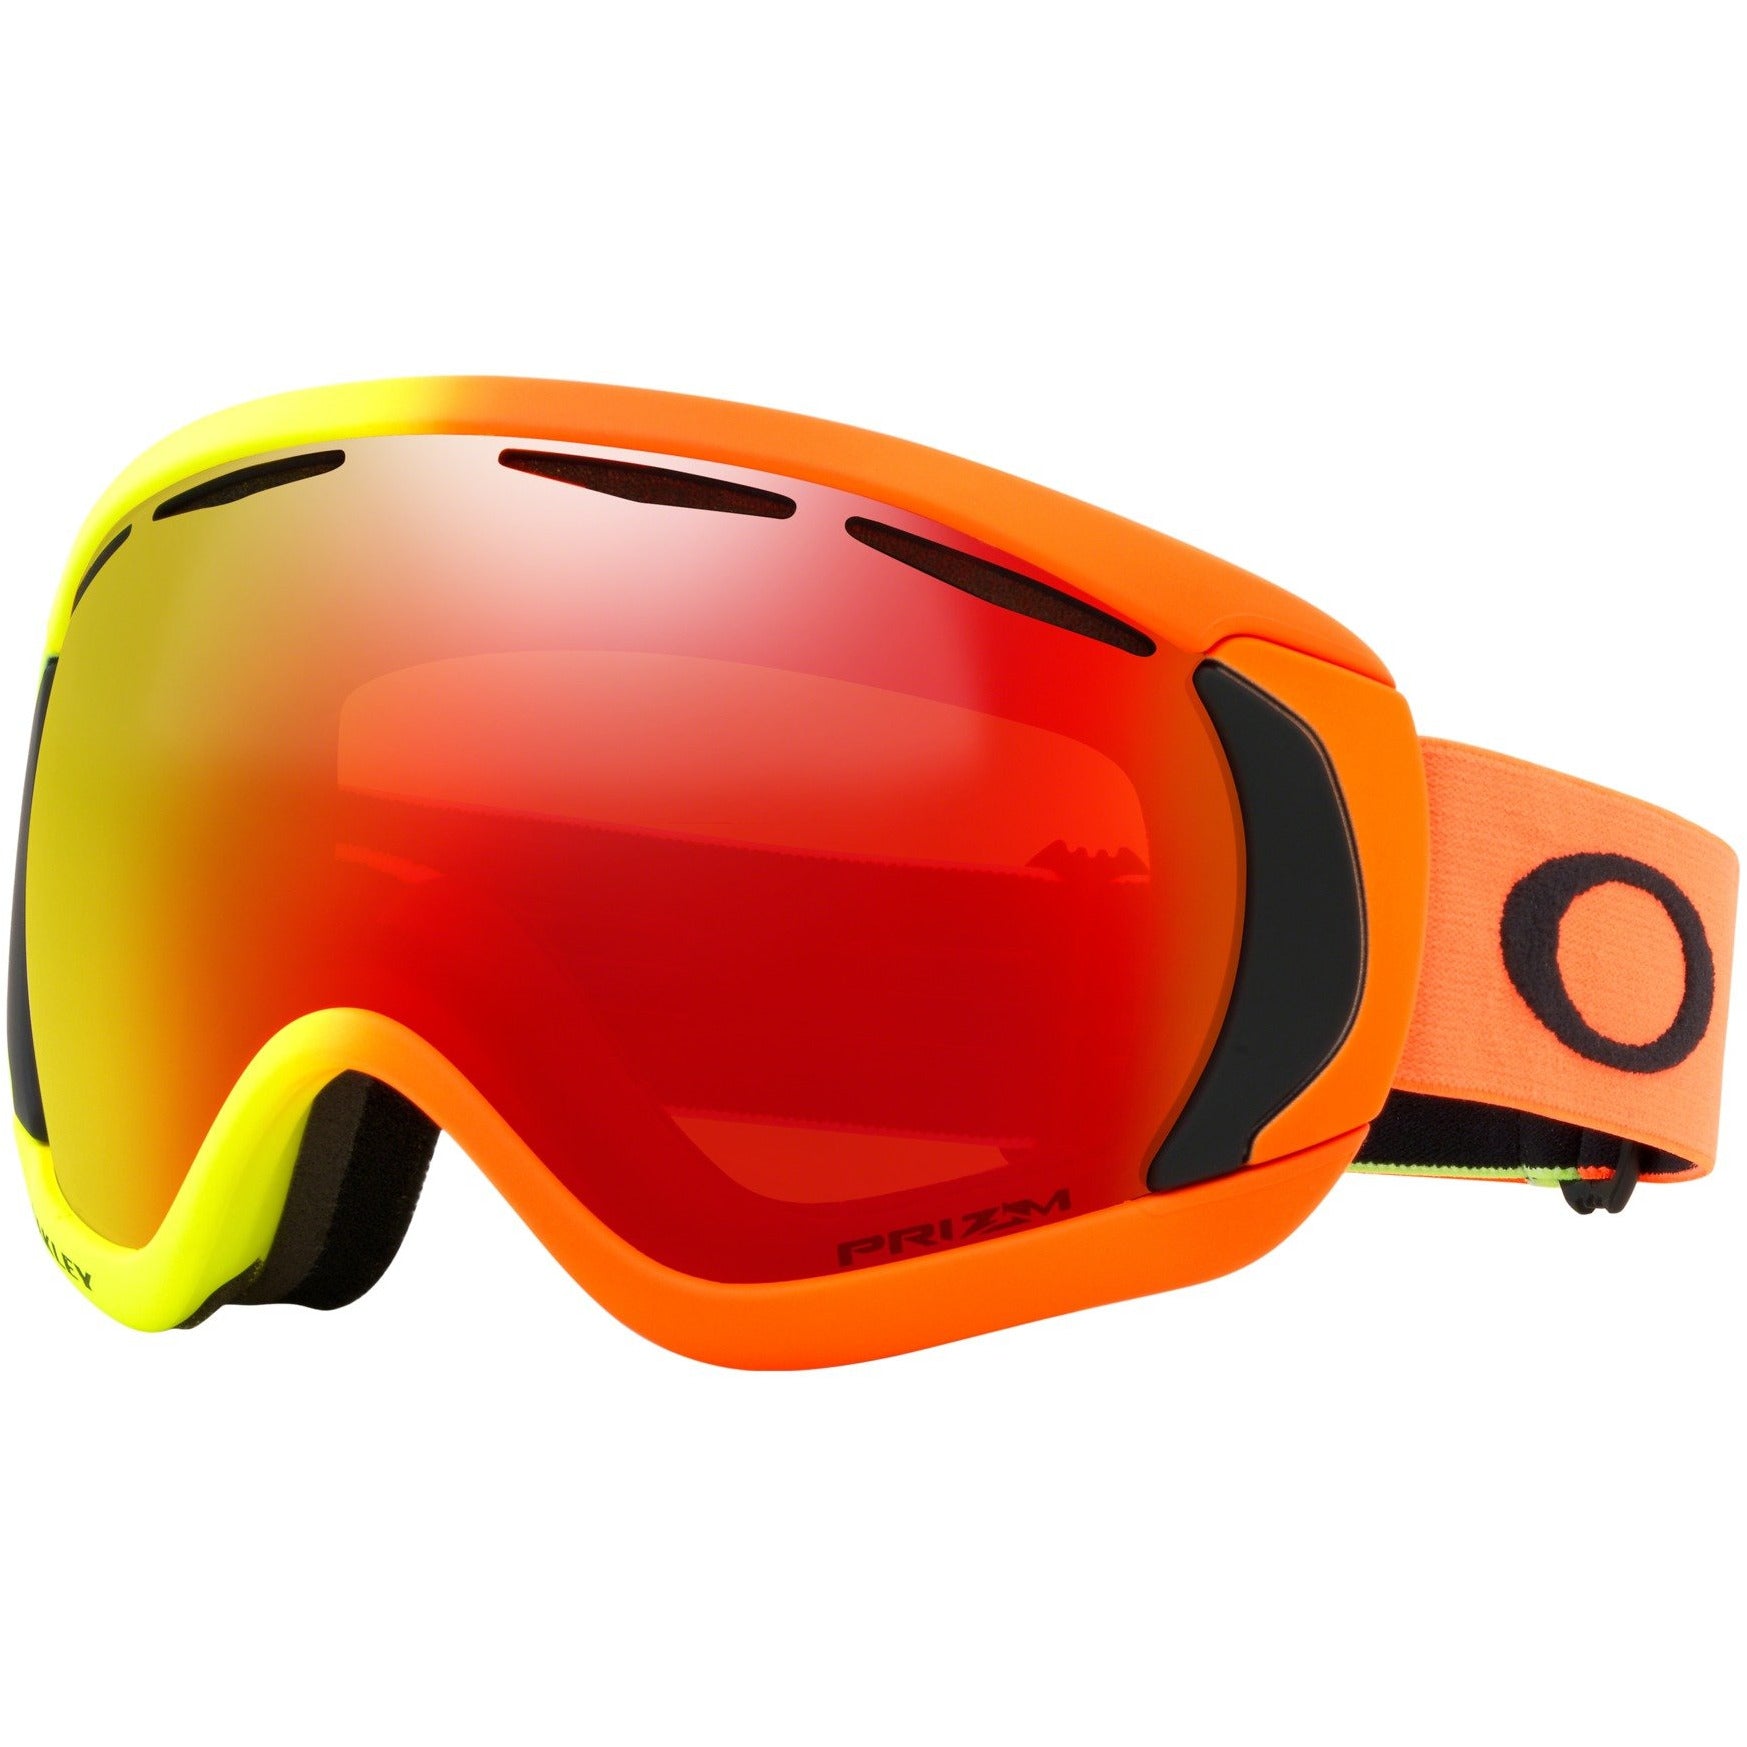 Limited edition Oakley goggles sale